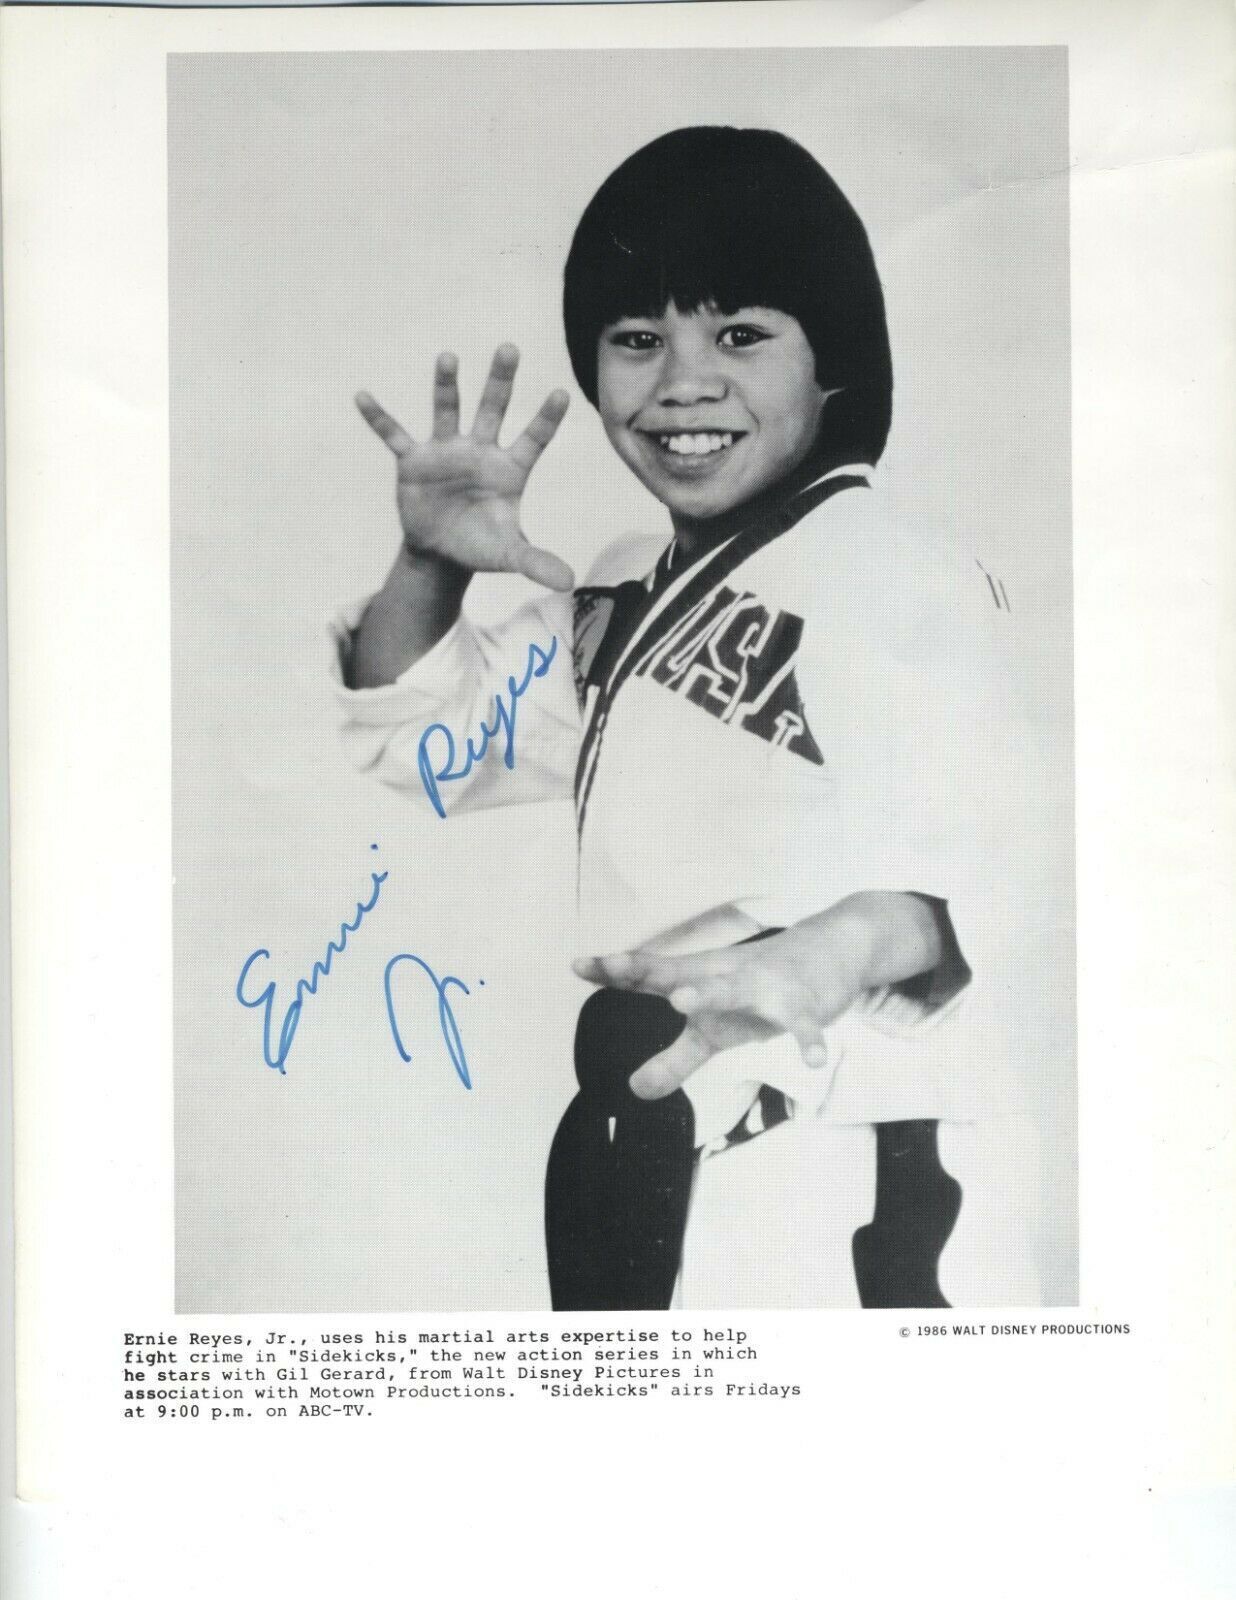 CHILD ACTOR AUTOGRAPH TAE KWON DO KARATE SIGNED PHOTO VERY YOUNG ERNIE REYES JR